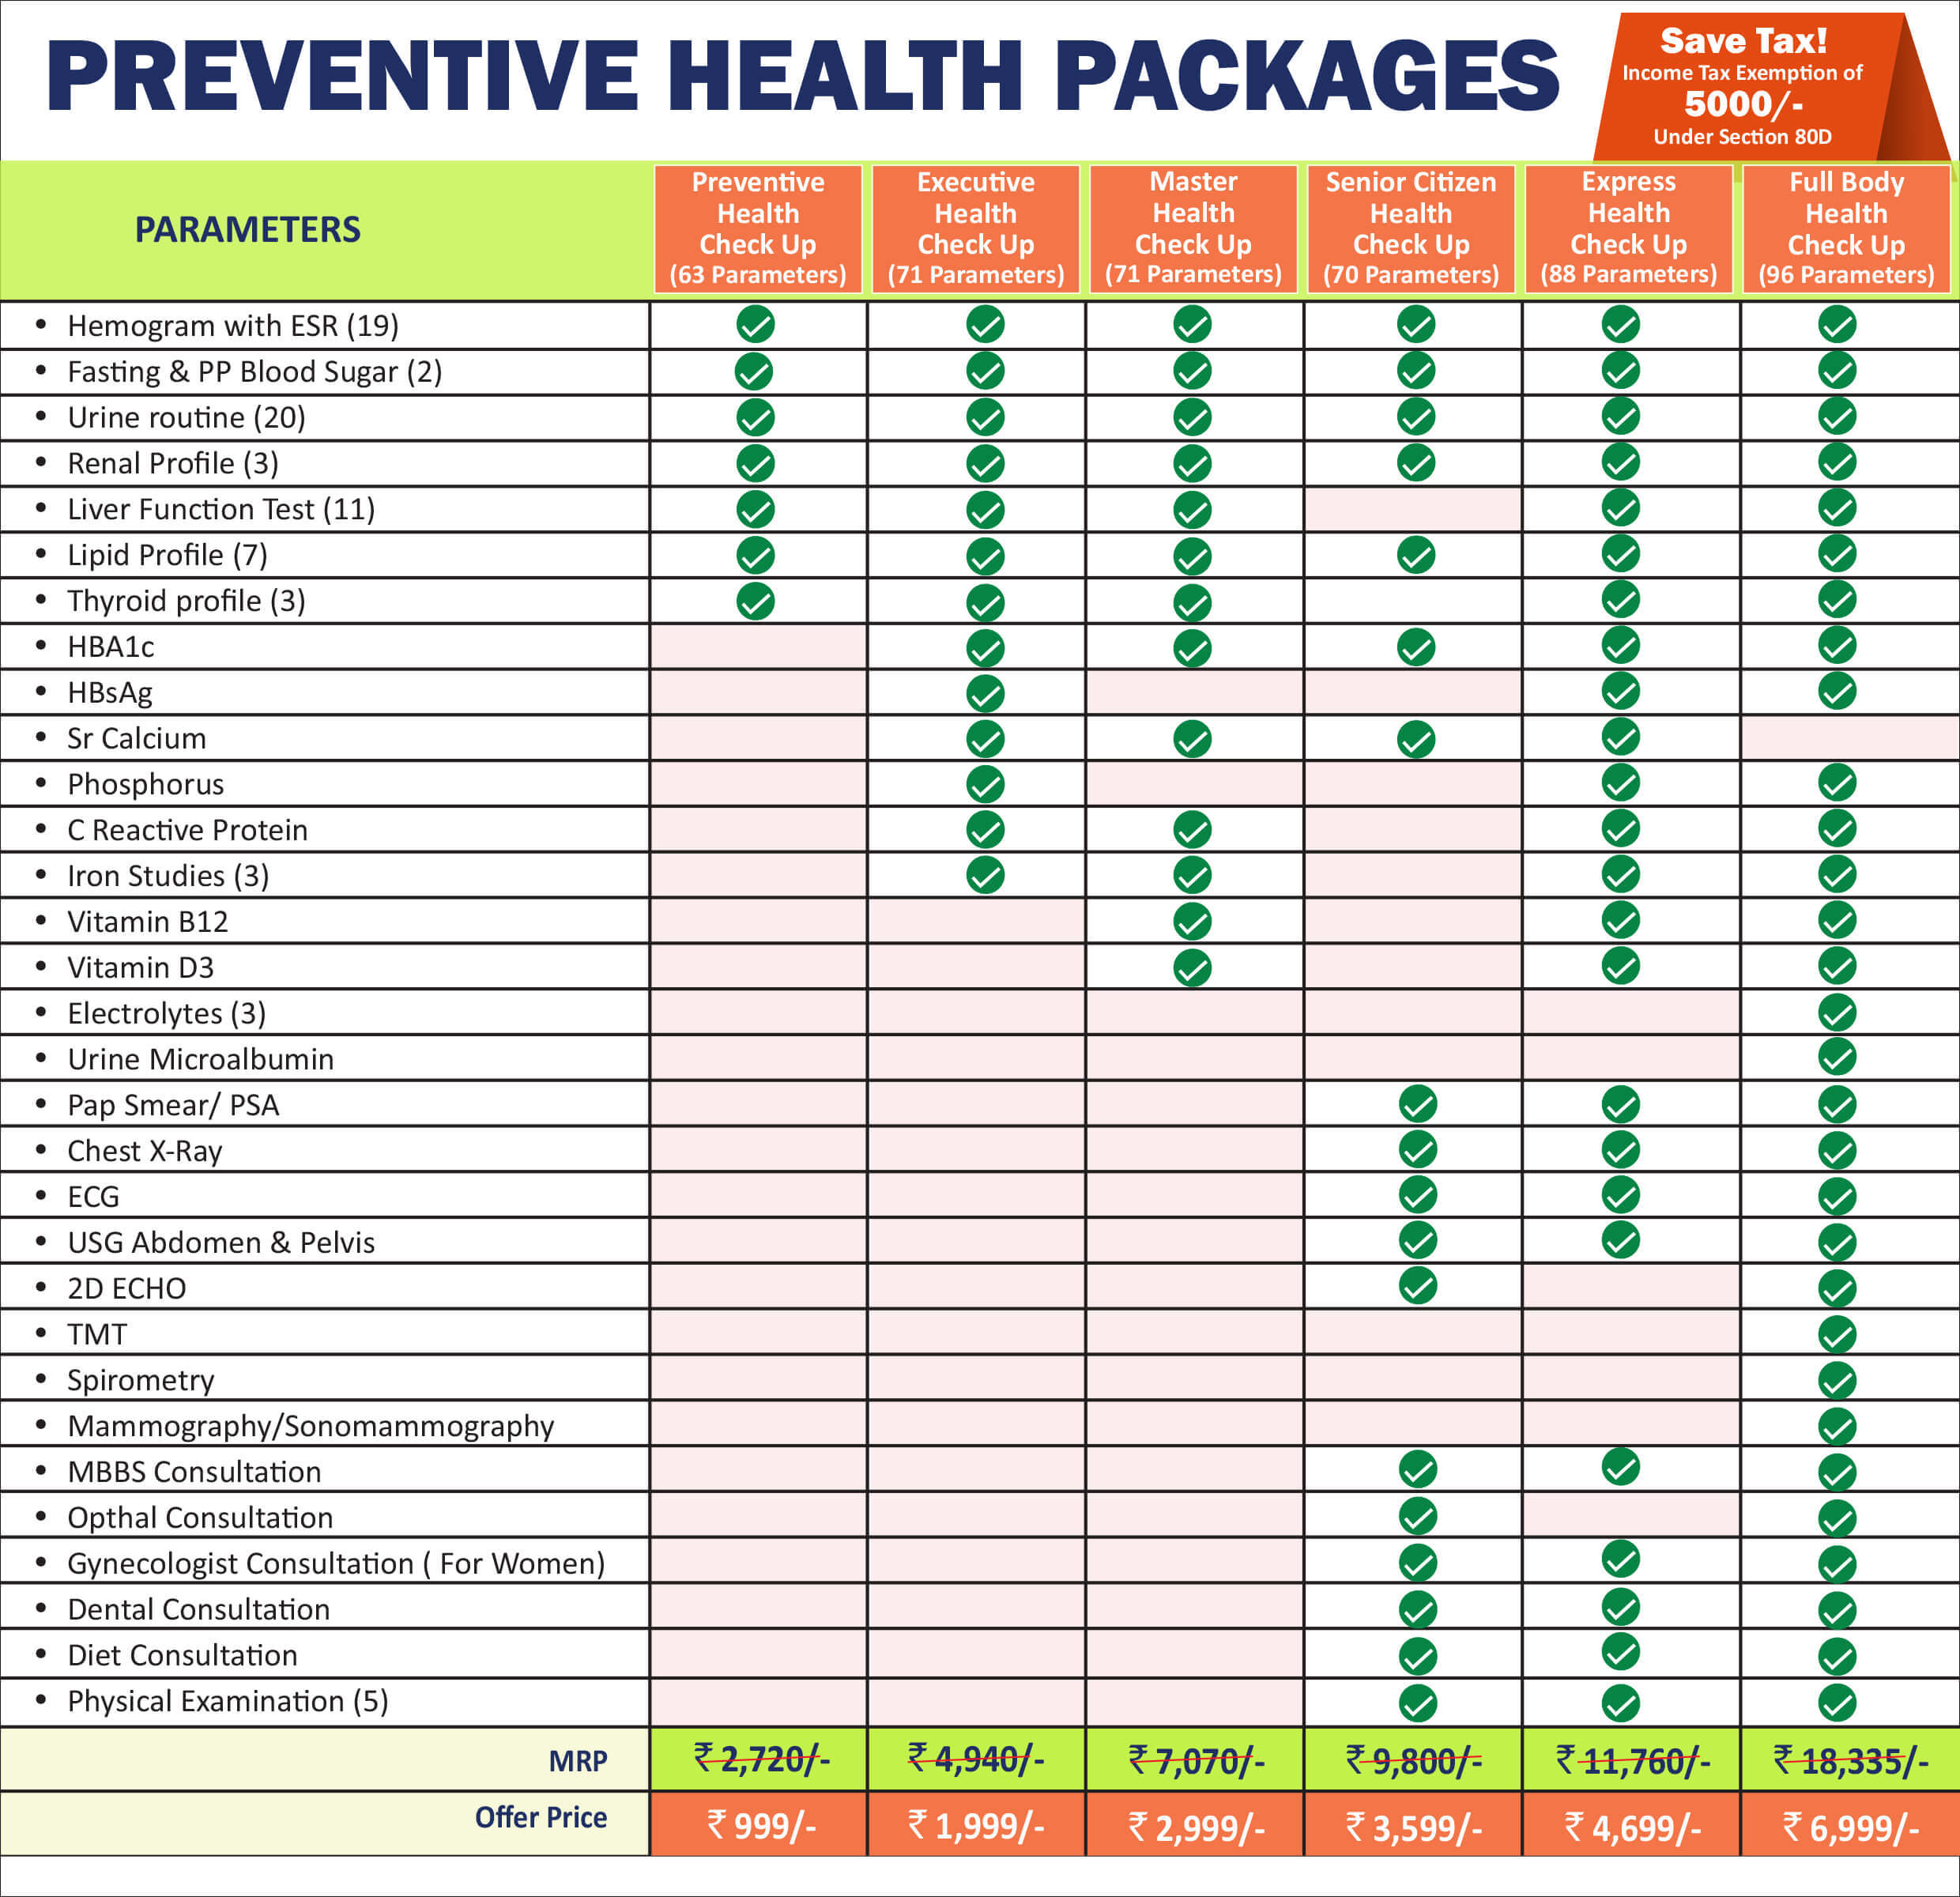 comparison of preventive health packages